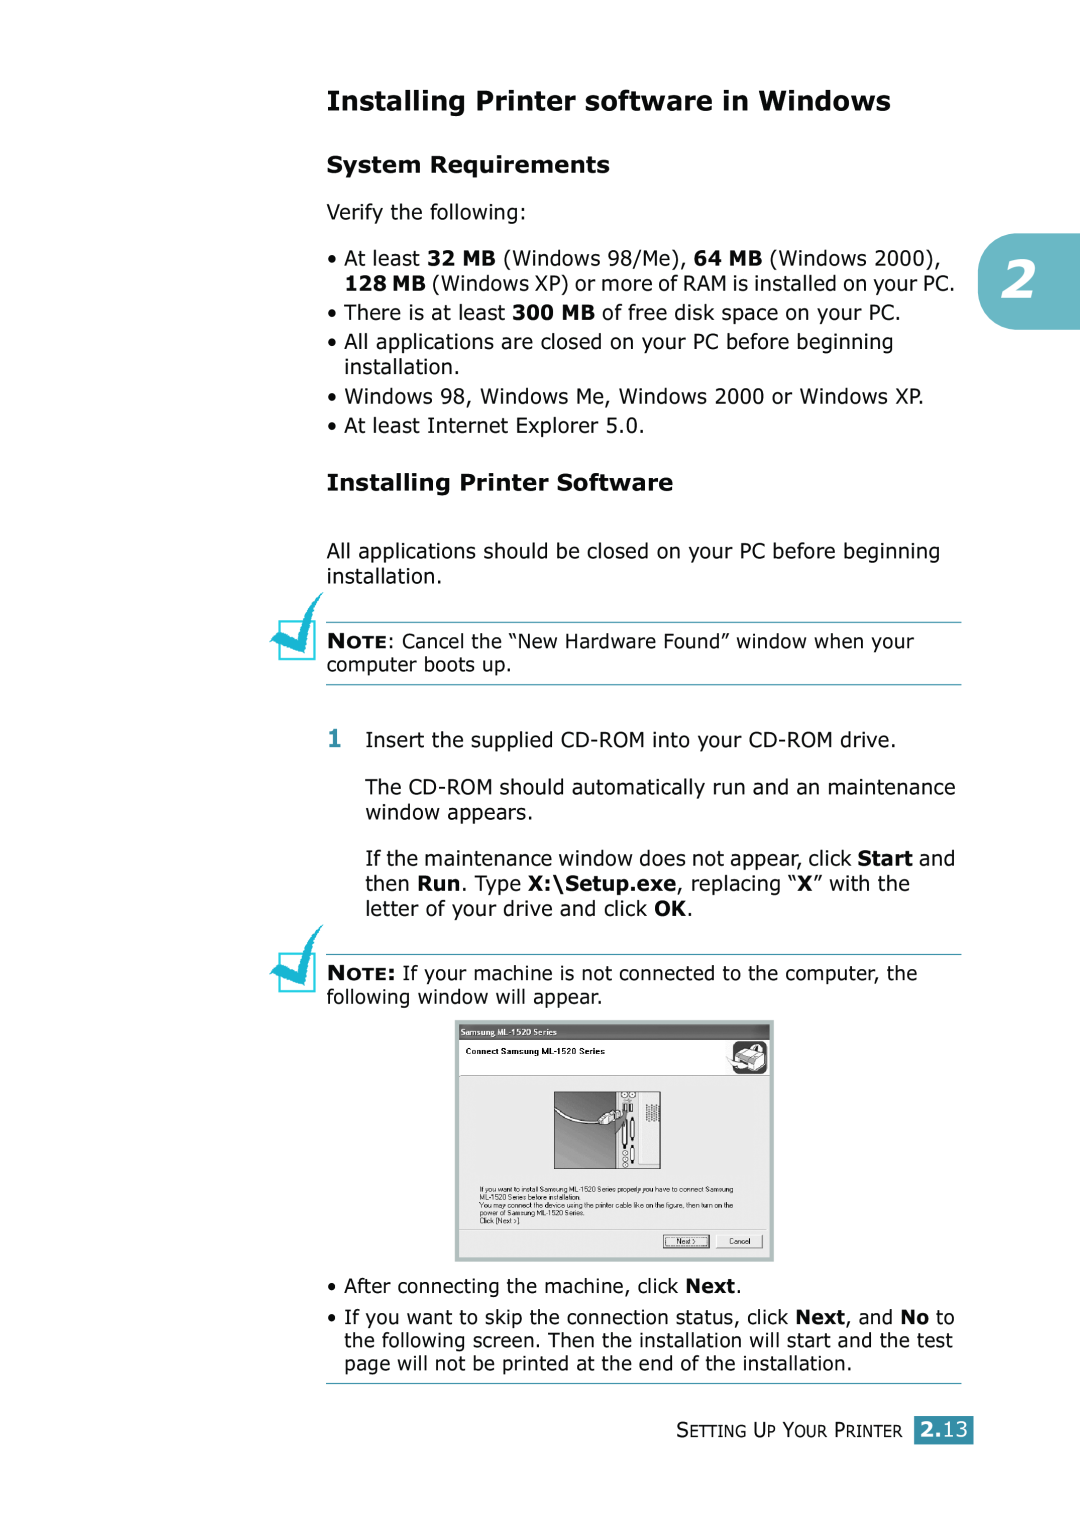 Samsung ML-1520 manual Installing Printer software in Windows, System Requirements, Installing Printer Software 